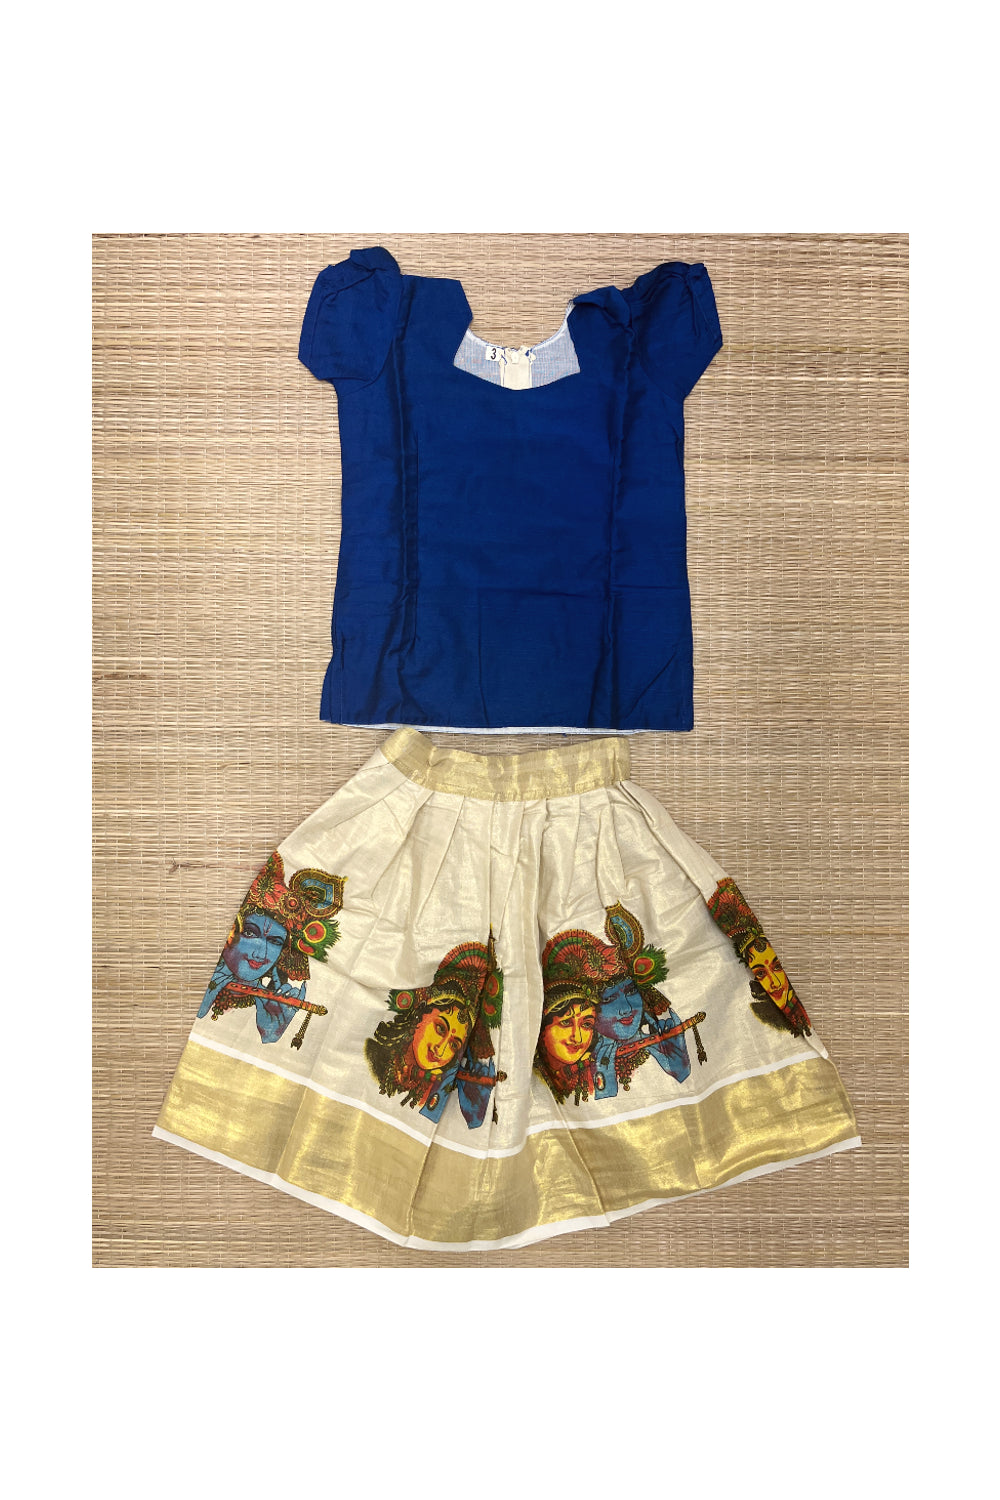 Southloom Kerala Tissue Pavada and Blouse with Krishna Radha Mural Designs (Age - 3 Years)